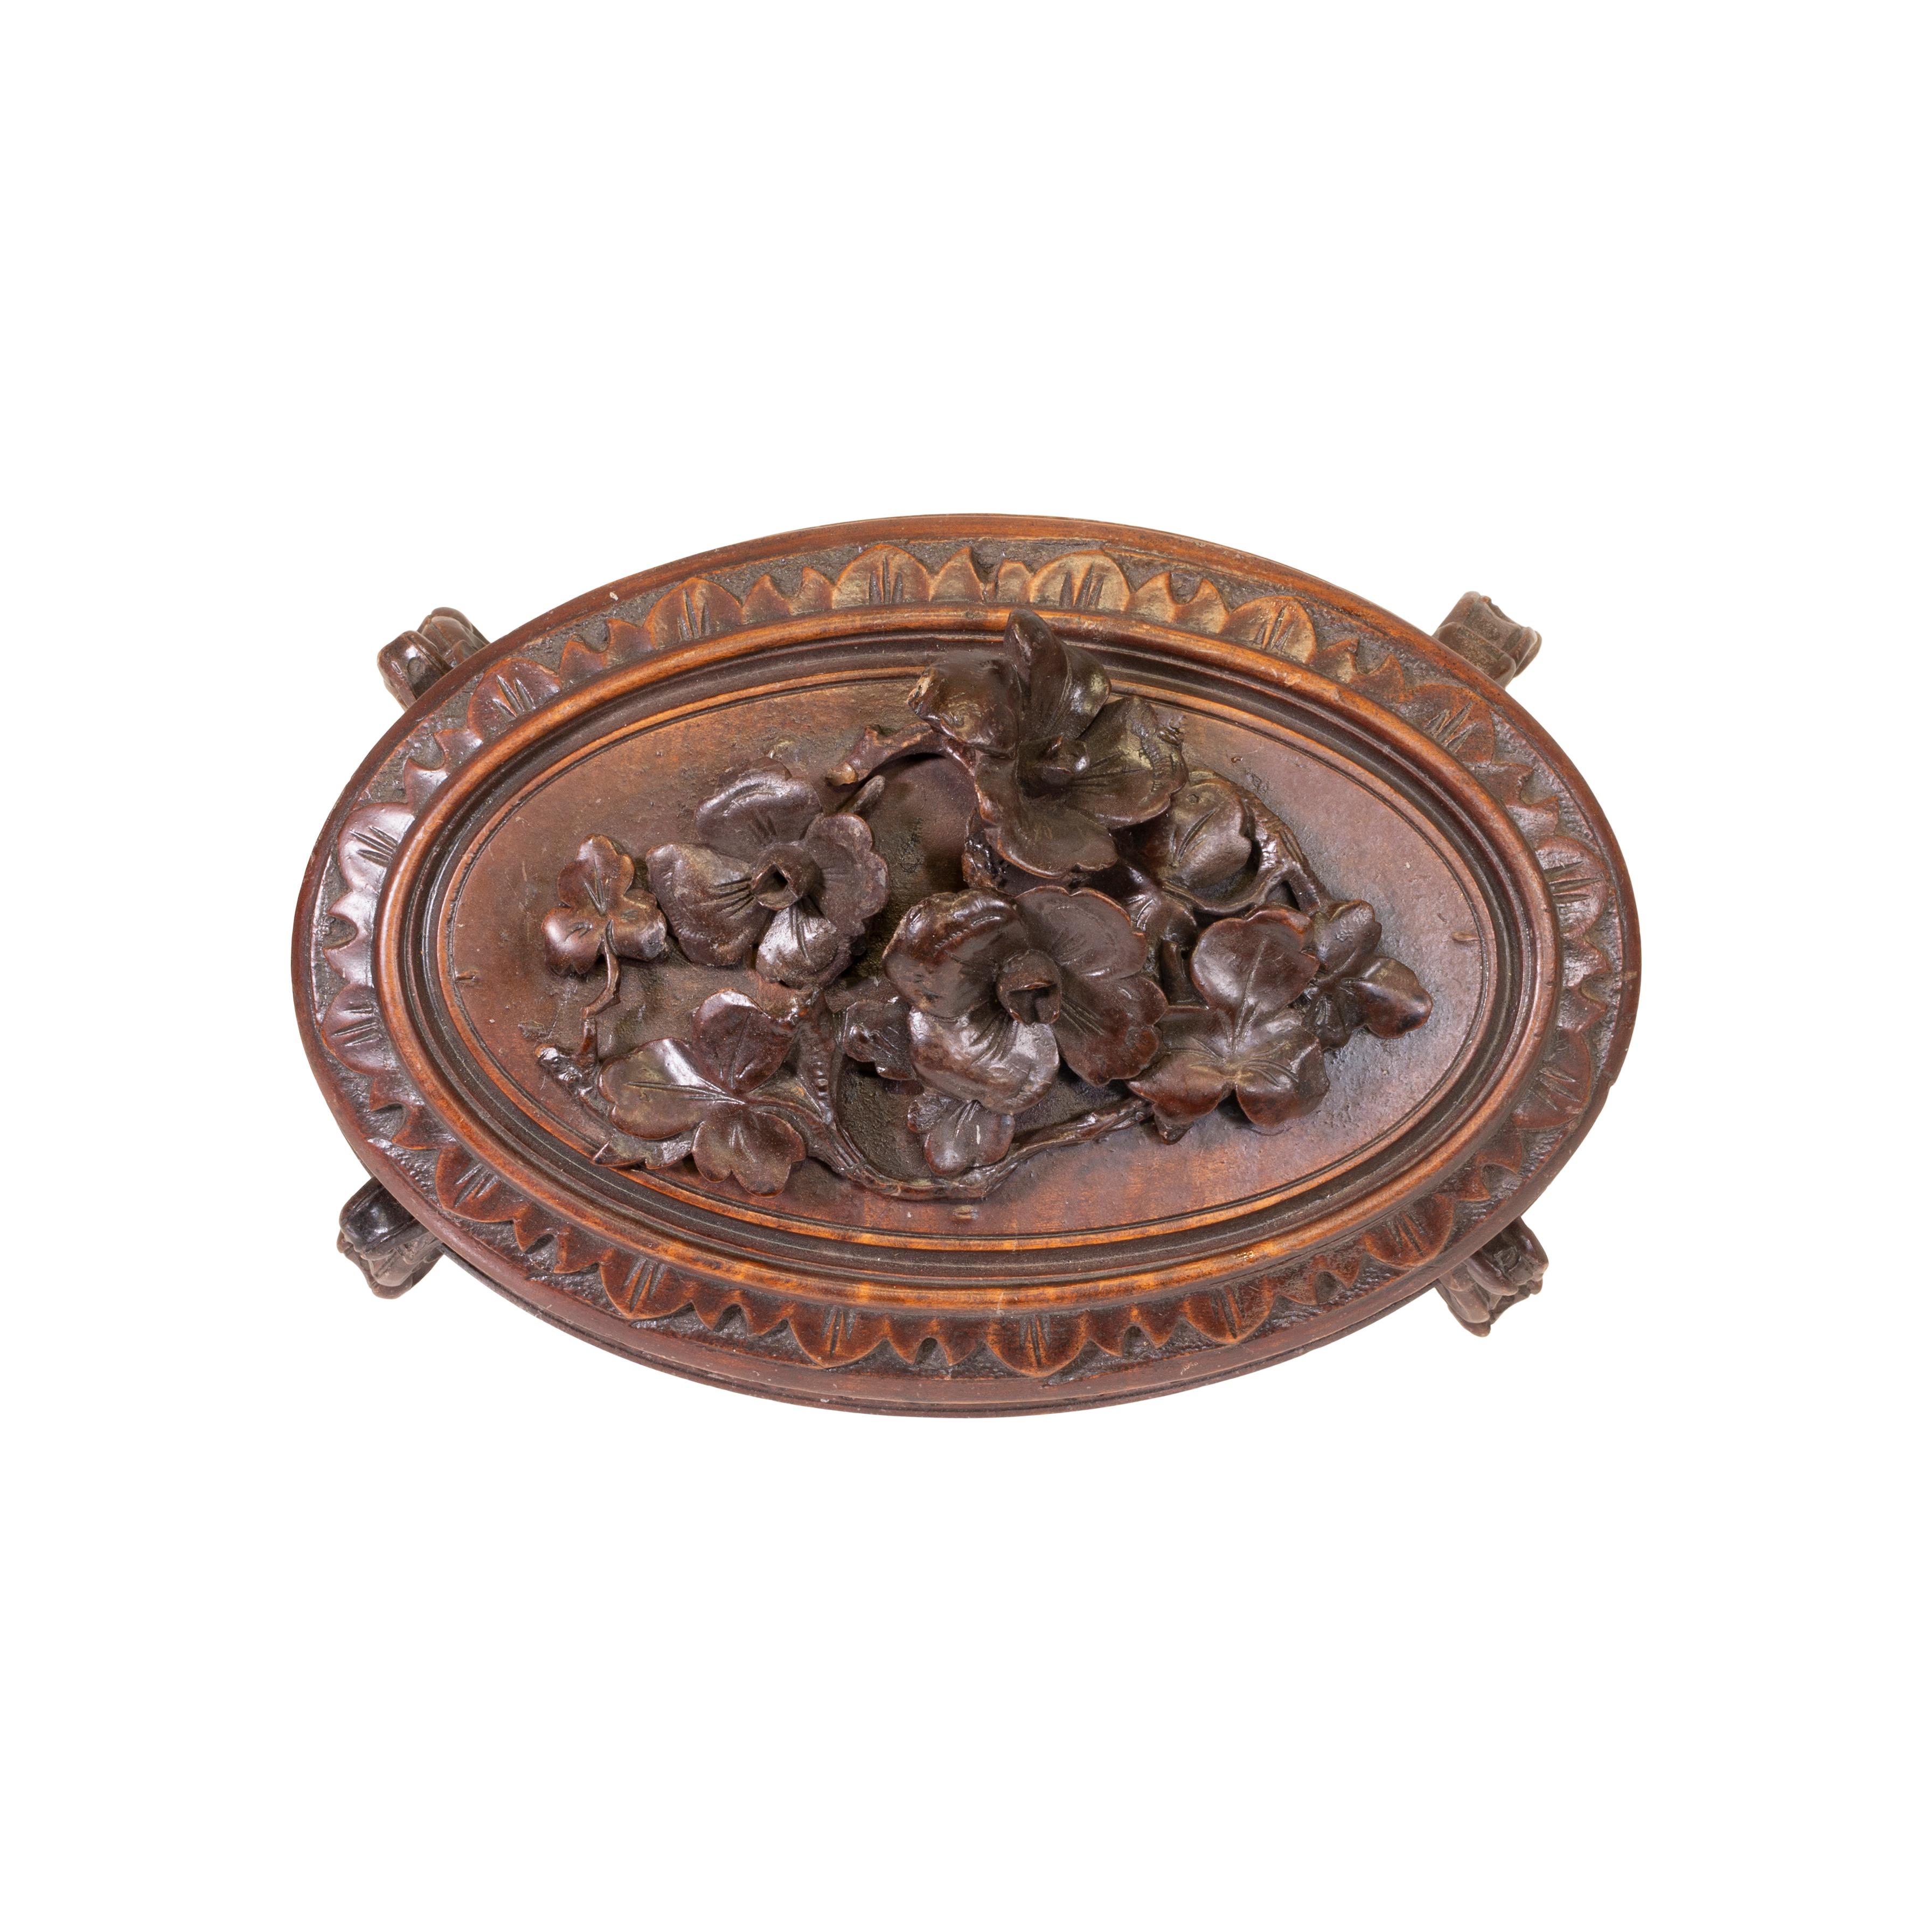 Black Forest Carved Jewelry Box, circa 1900 In Excellent Condition For Sale In Coeur d'Alene, ID